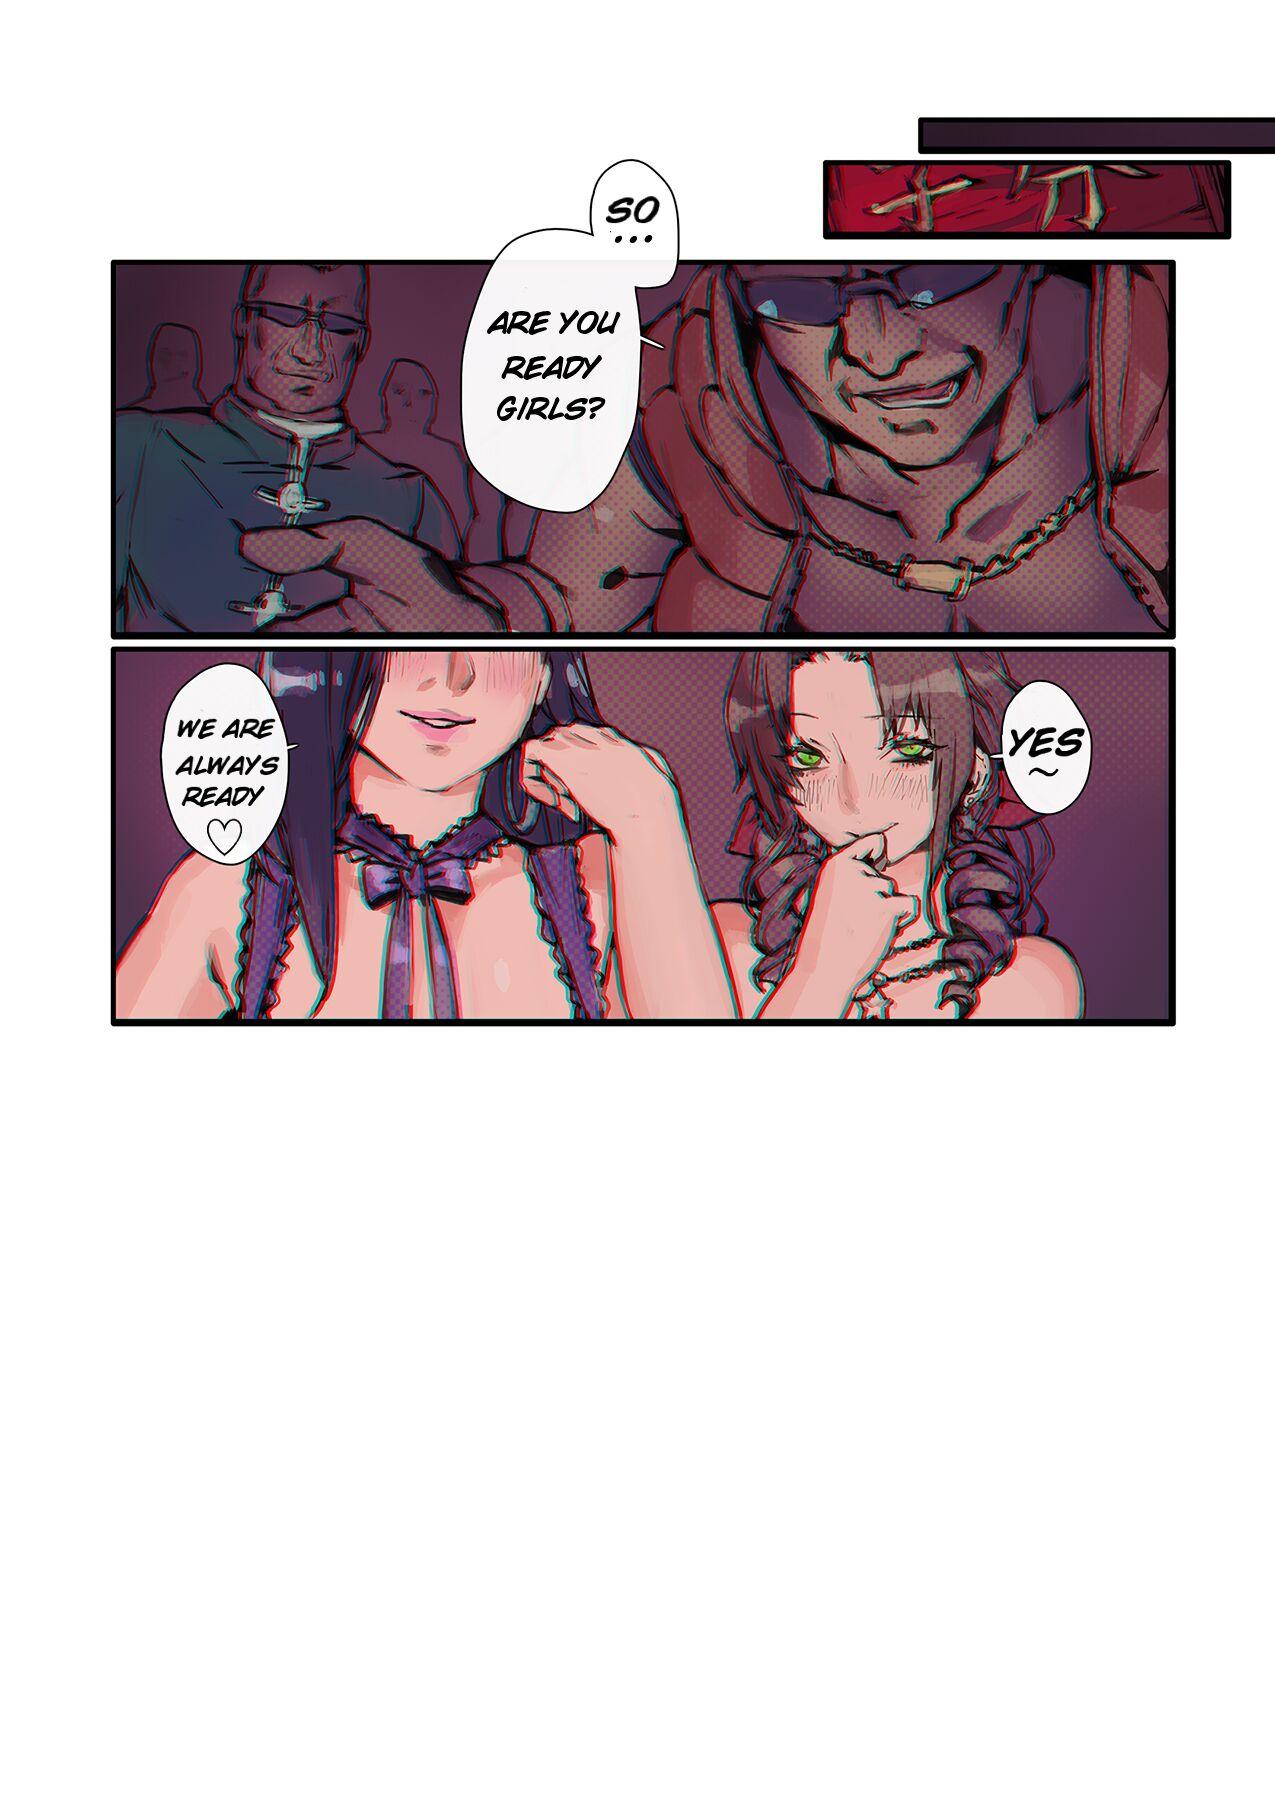 Gay Shaved The Escort and the Flower Girl - Final fantasy vii Threeway - Page 2